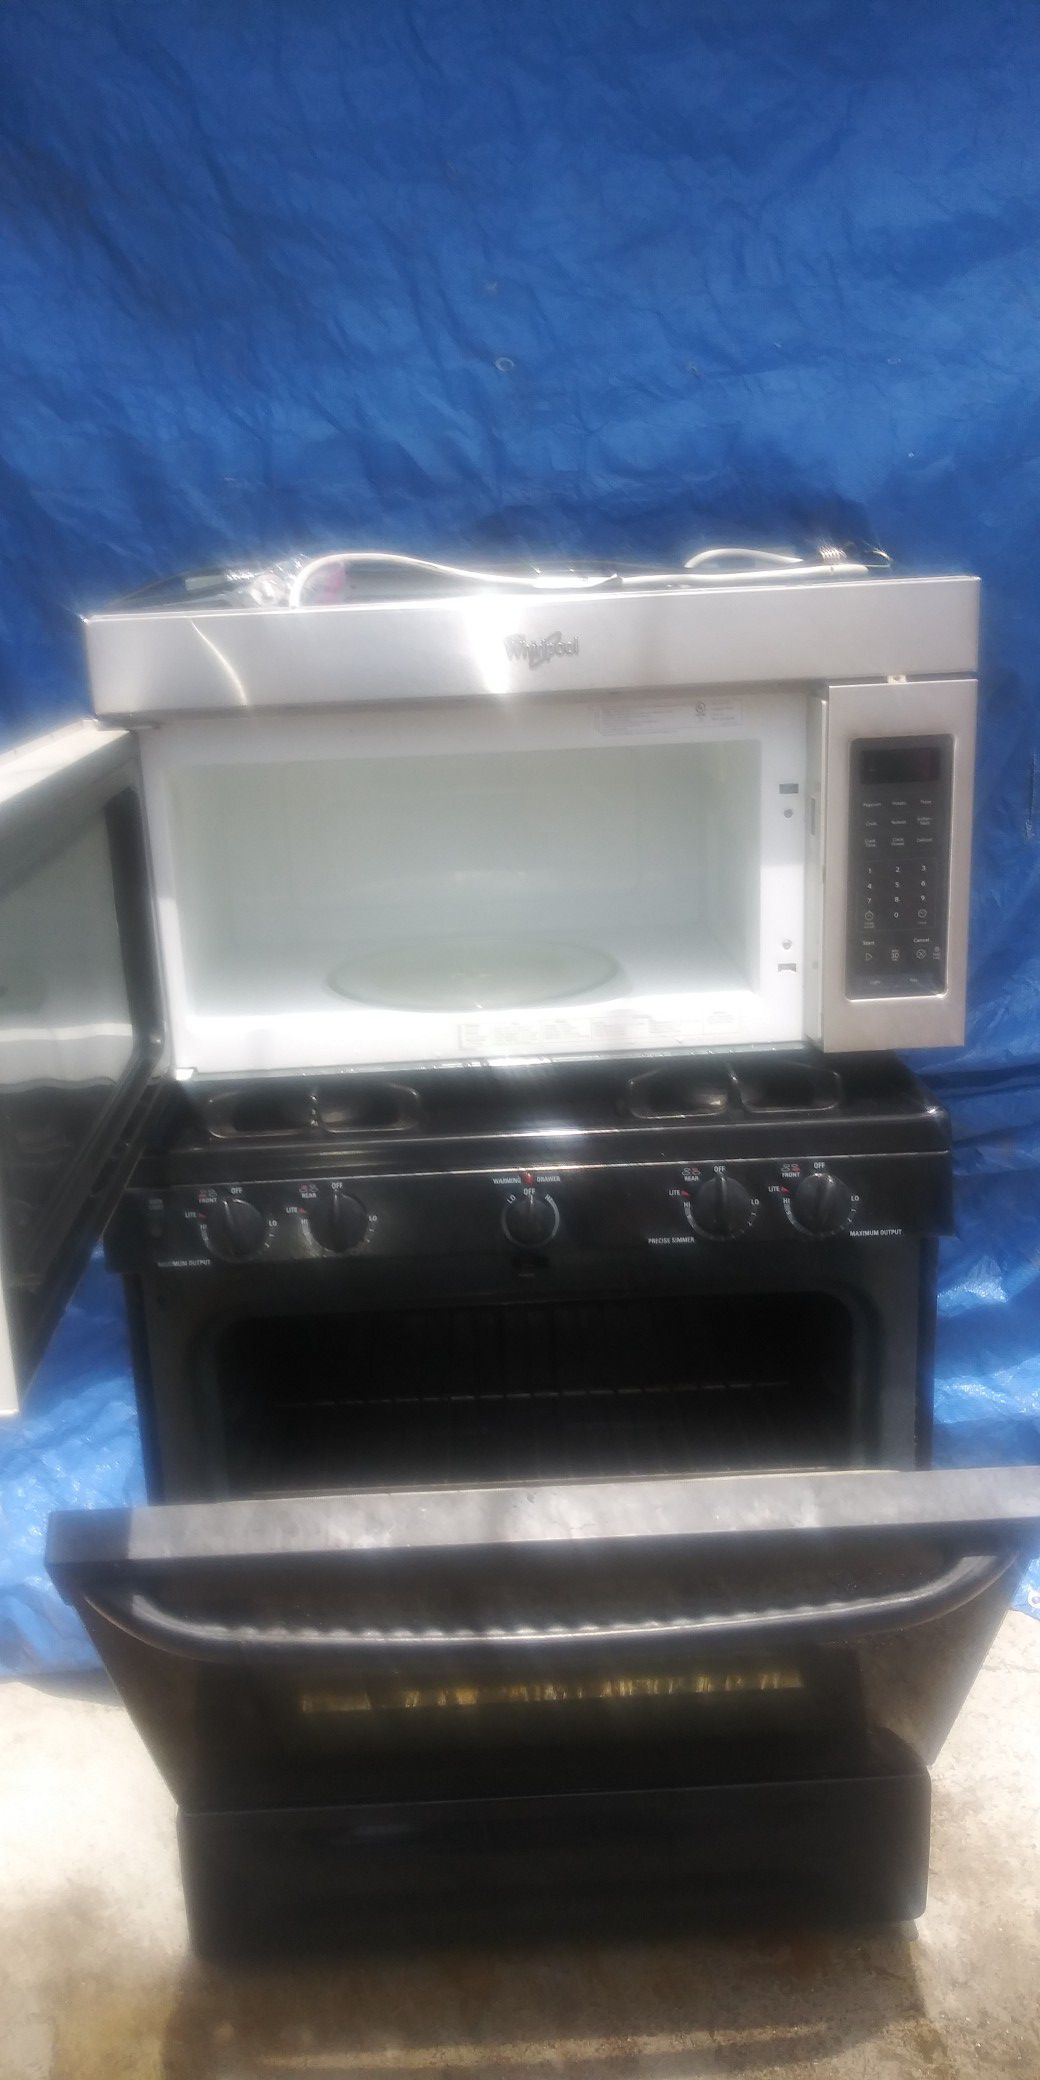 GE stove with upper microwave